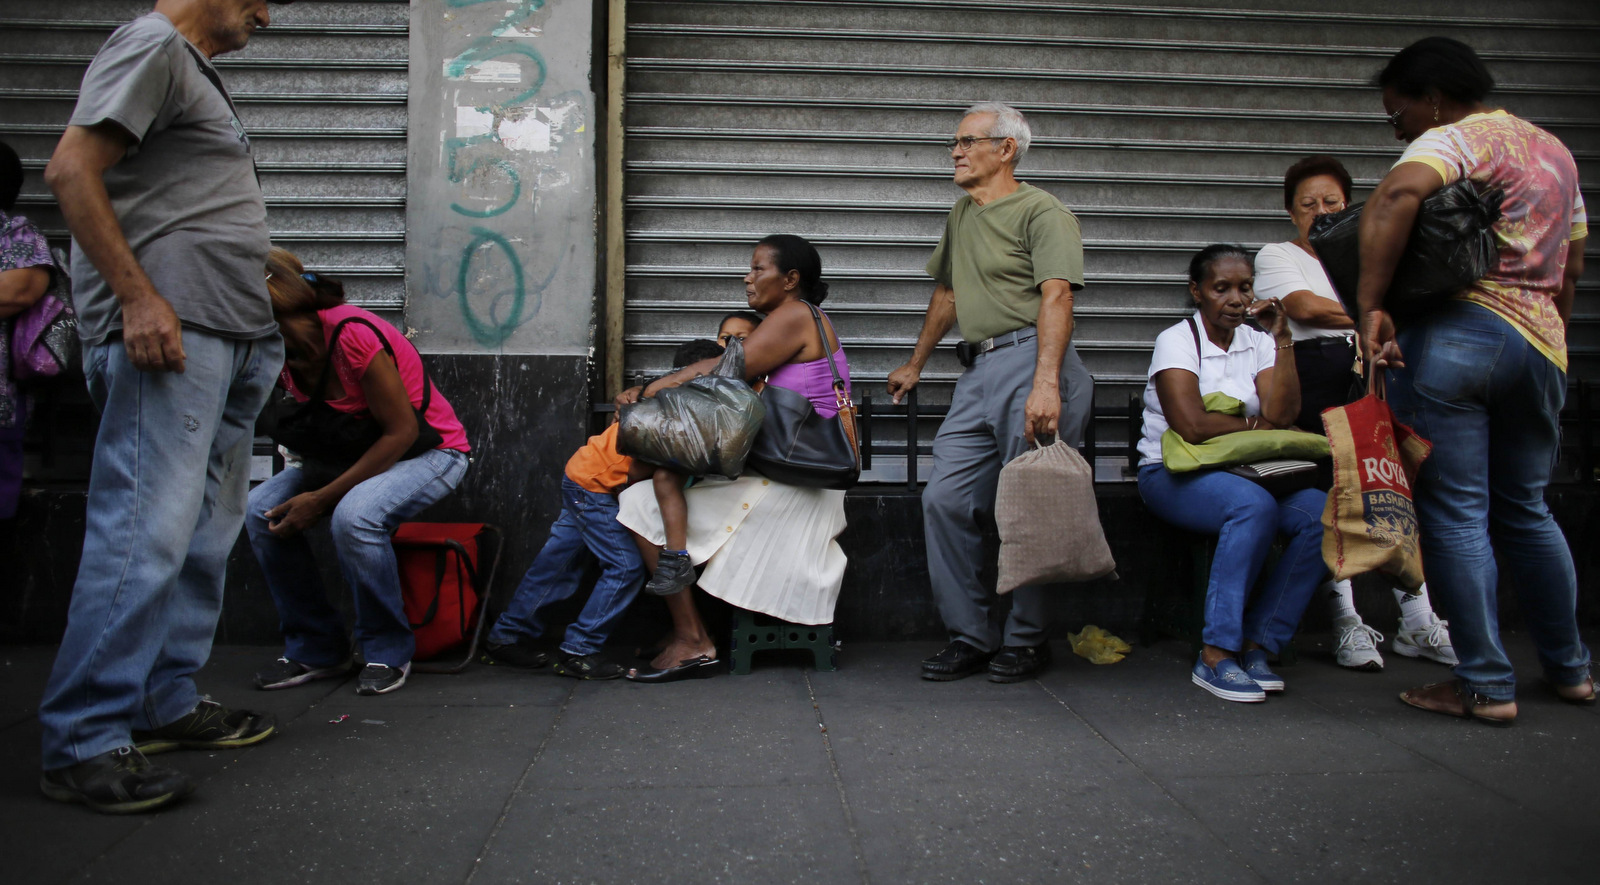 People wait outside a supermarket for subsidized products to arrive in Caracas, Venezuela amid crippling U.S. financial sanctions. Ariana Cubillos | AP